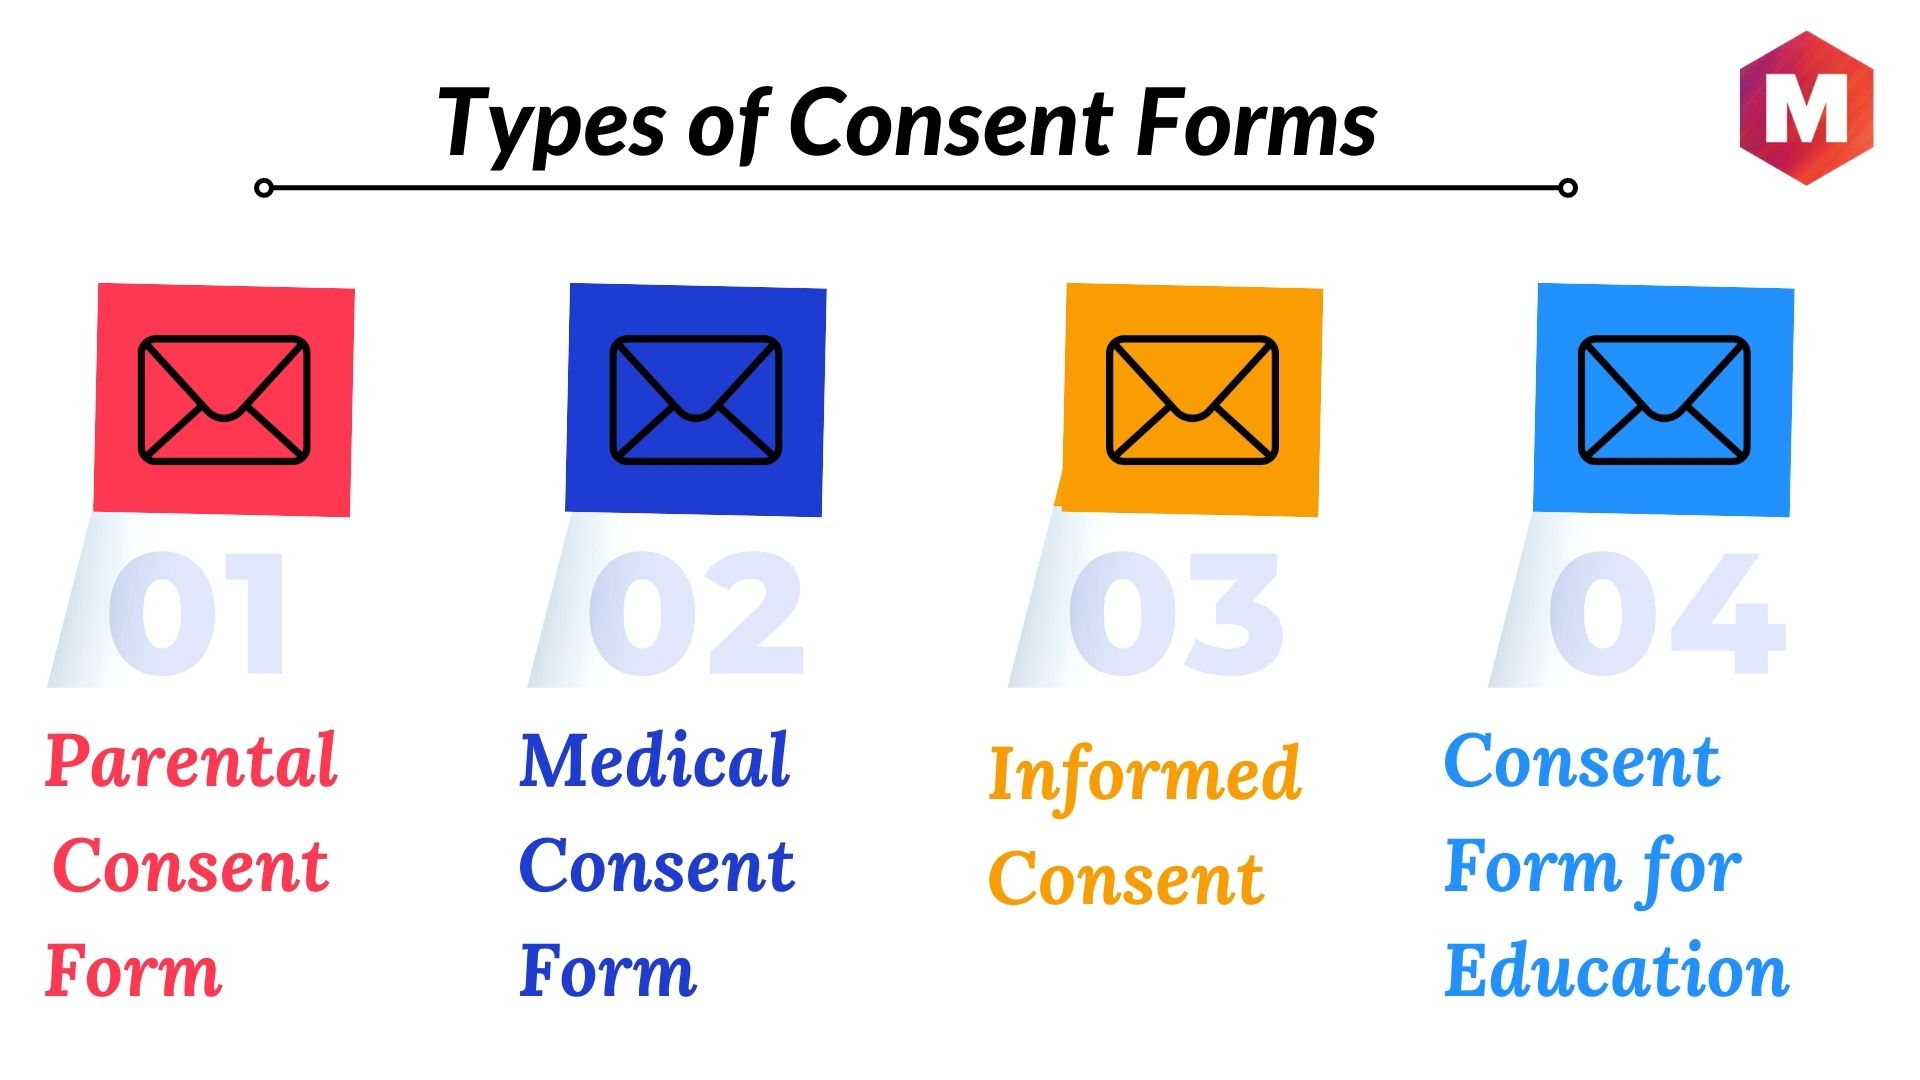 Types of Consent Forms